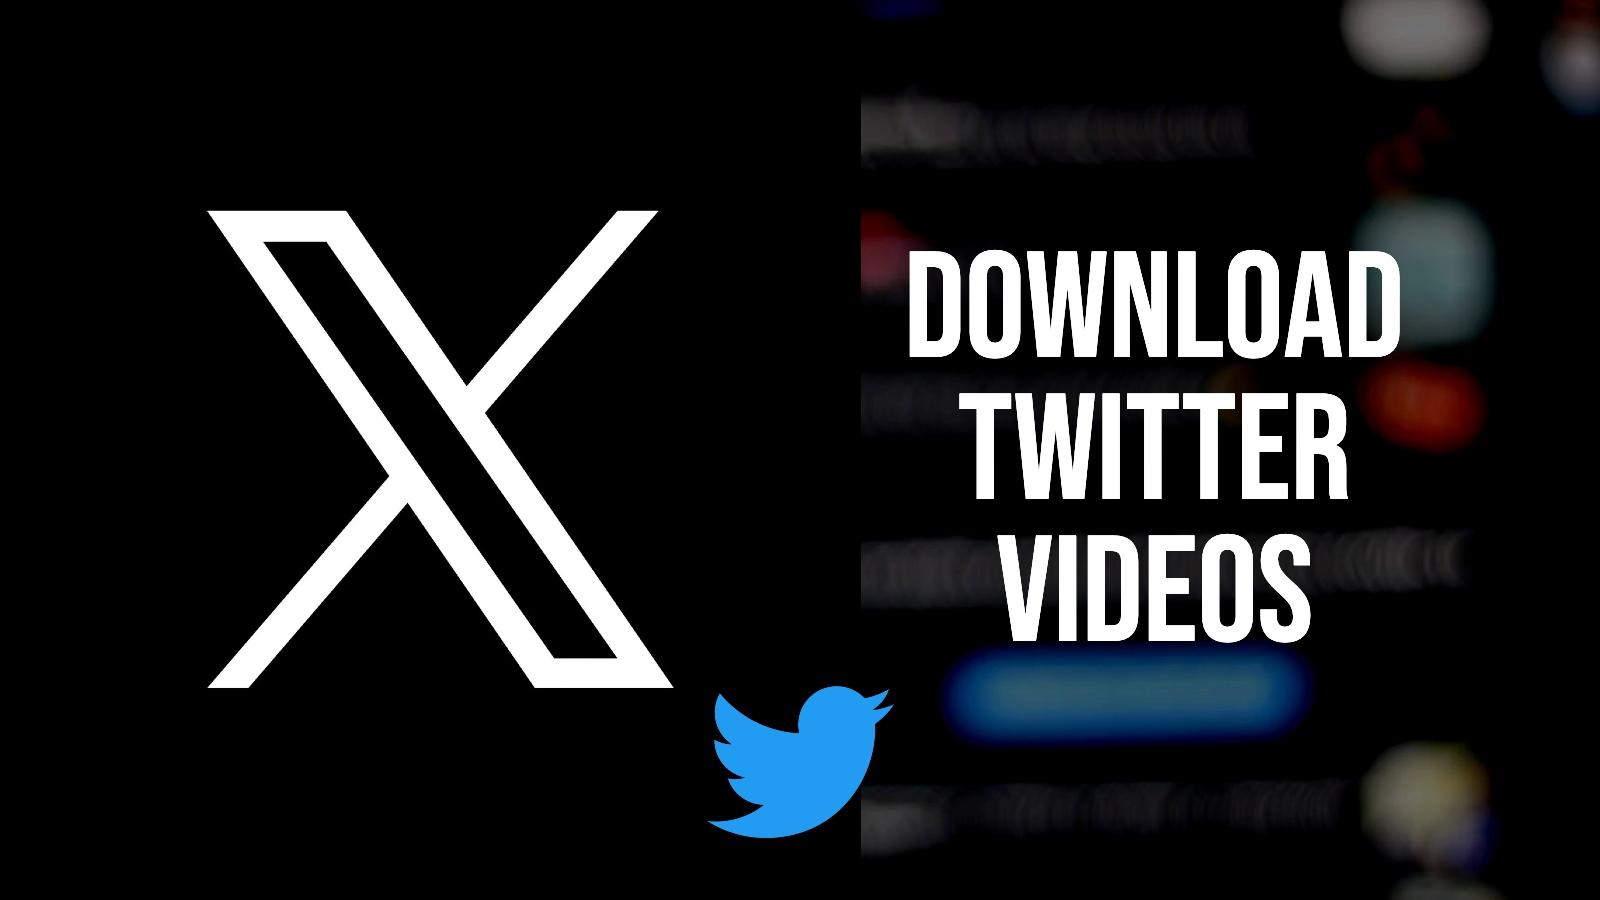 X logo with Twitter logo in middle. On the right there is text that says 'Download Twitter videos'